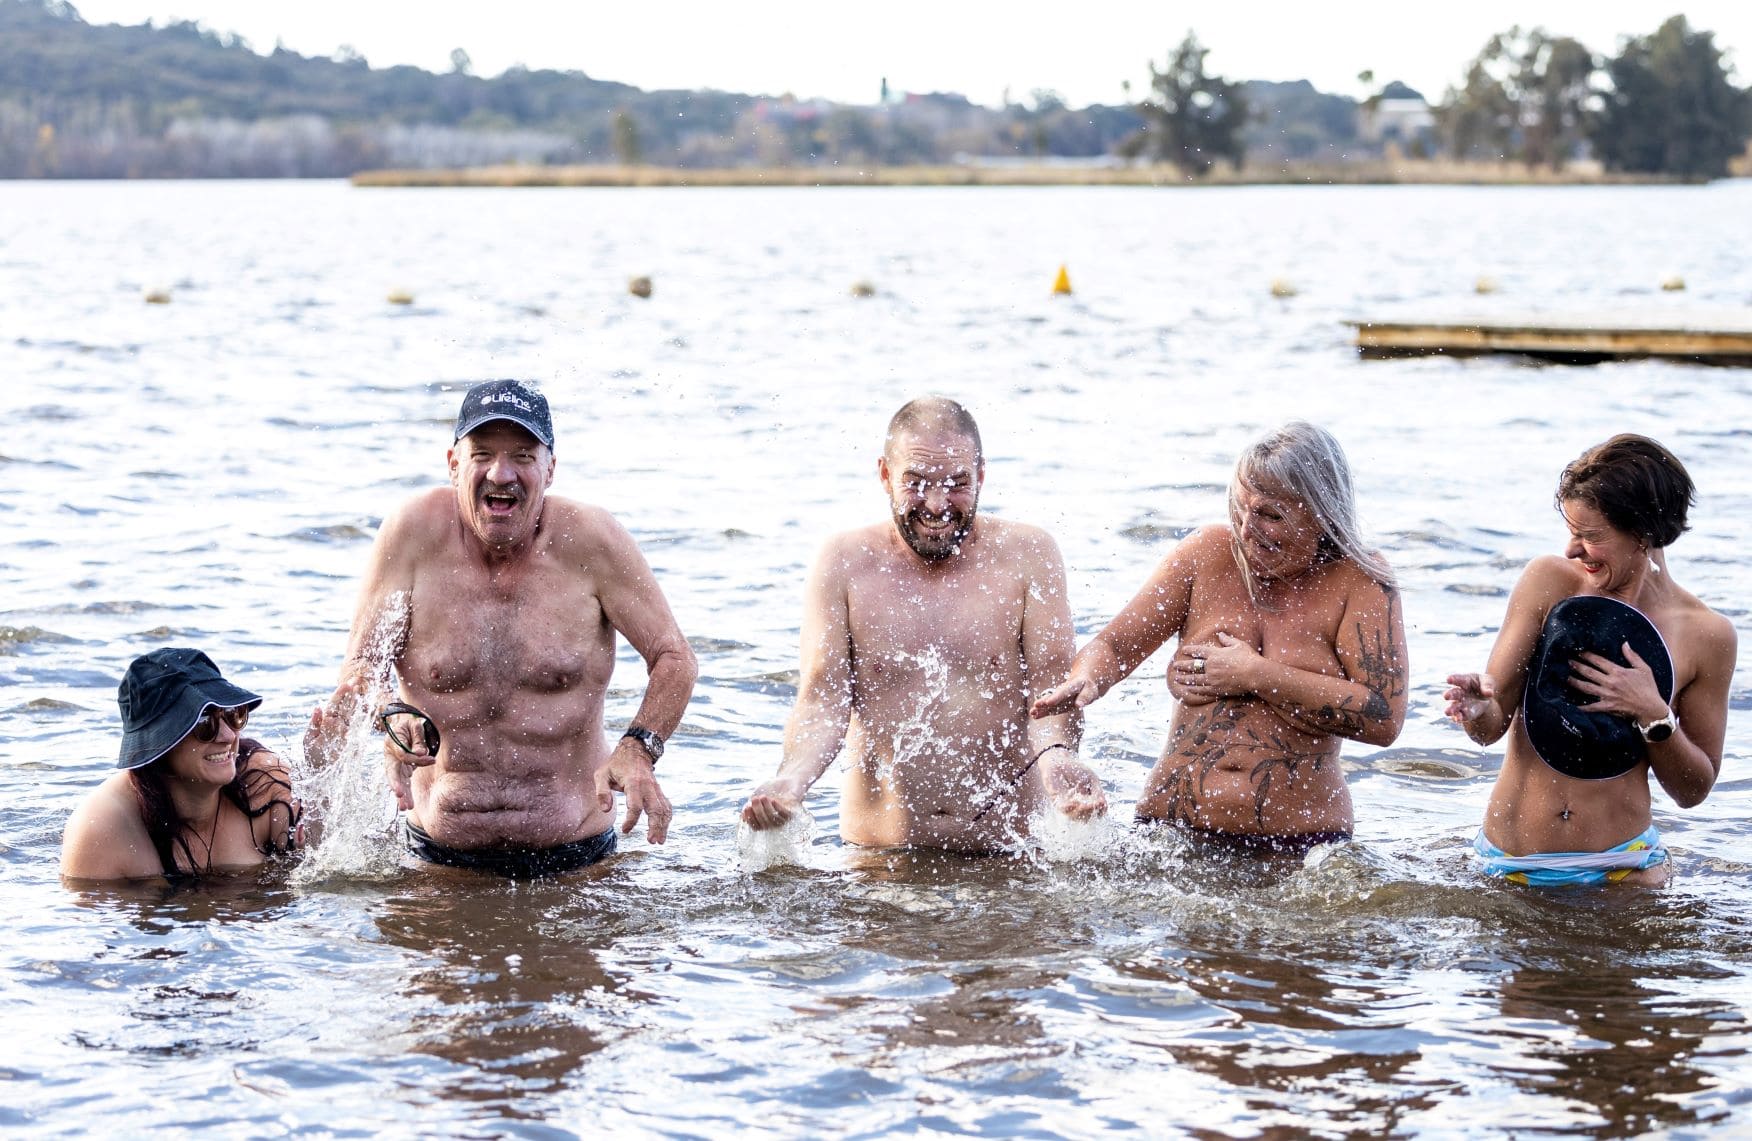 Go jump in the Lake: Streakers swim on the solstice | Canberra Weekly